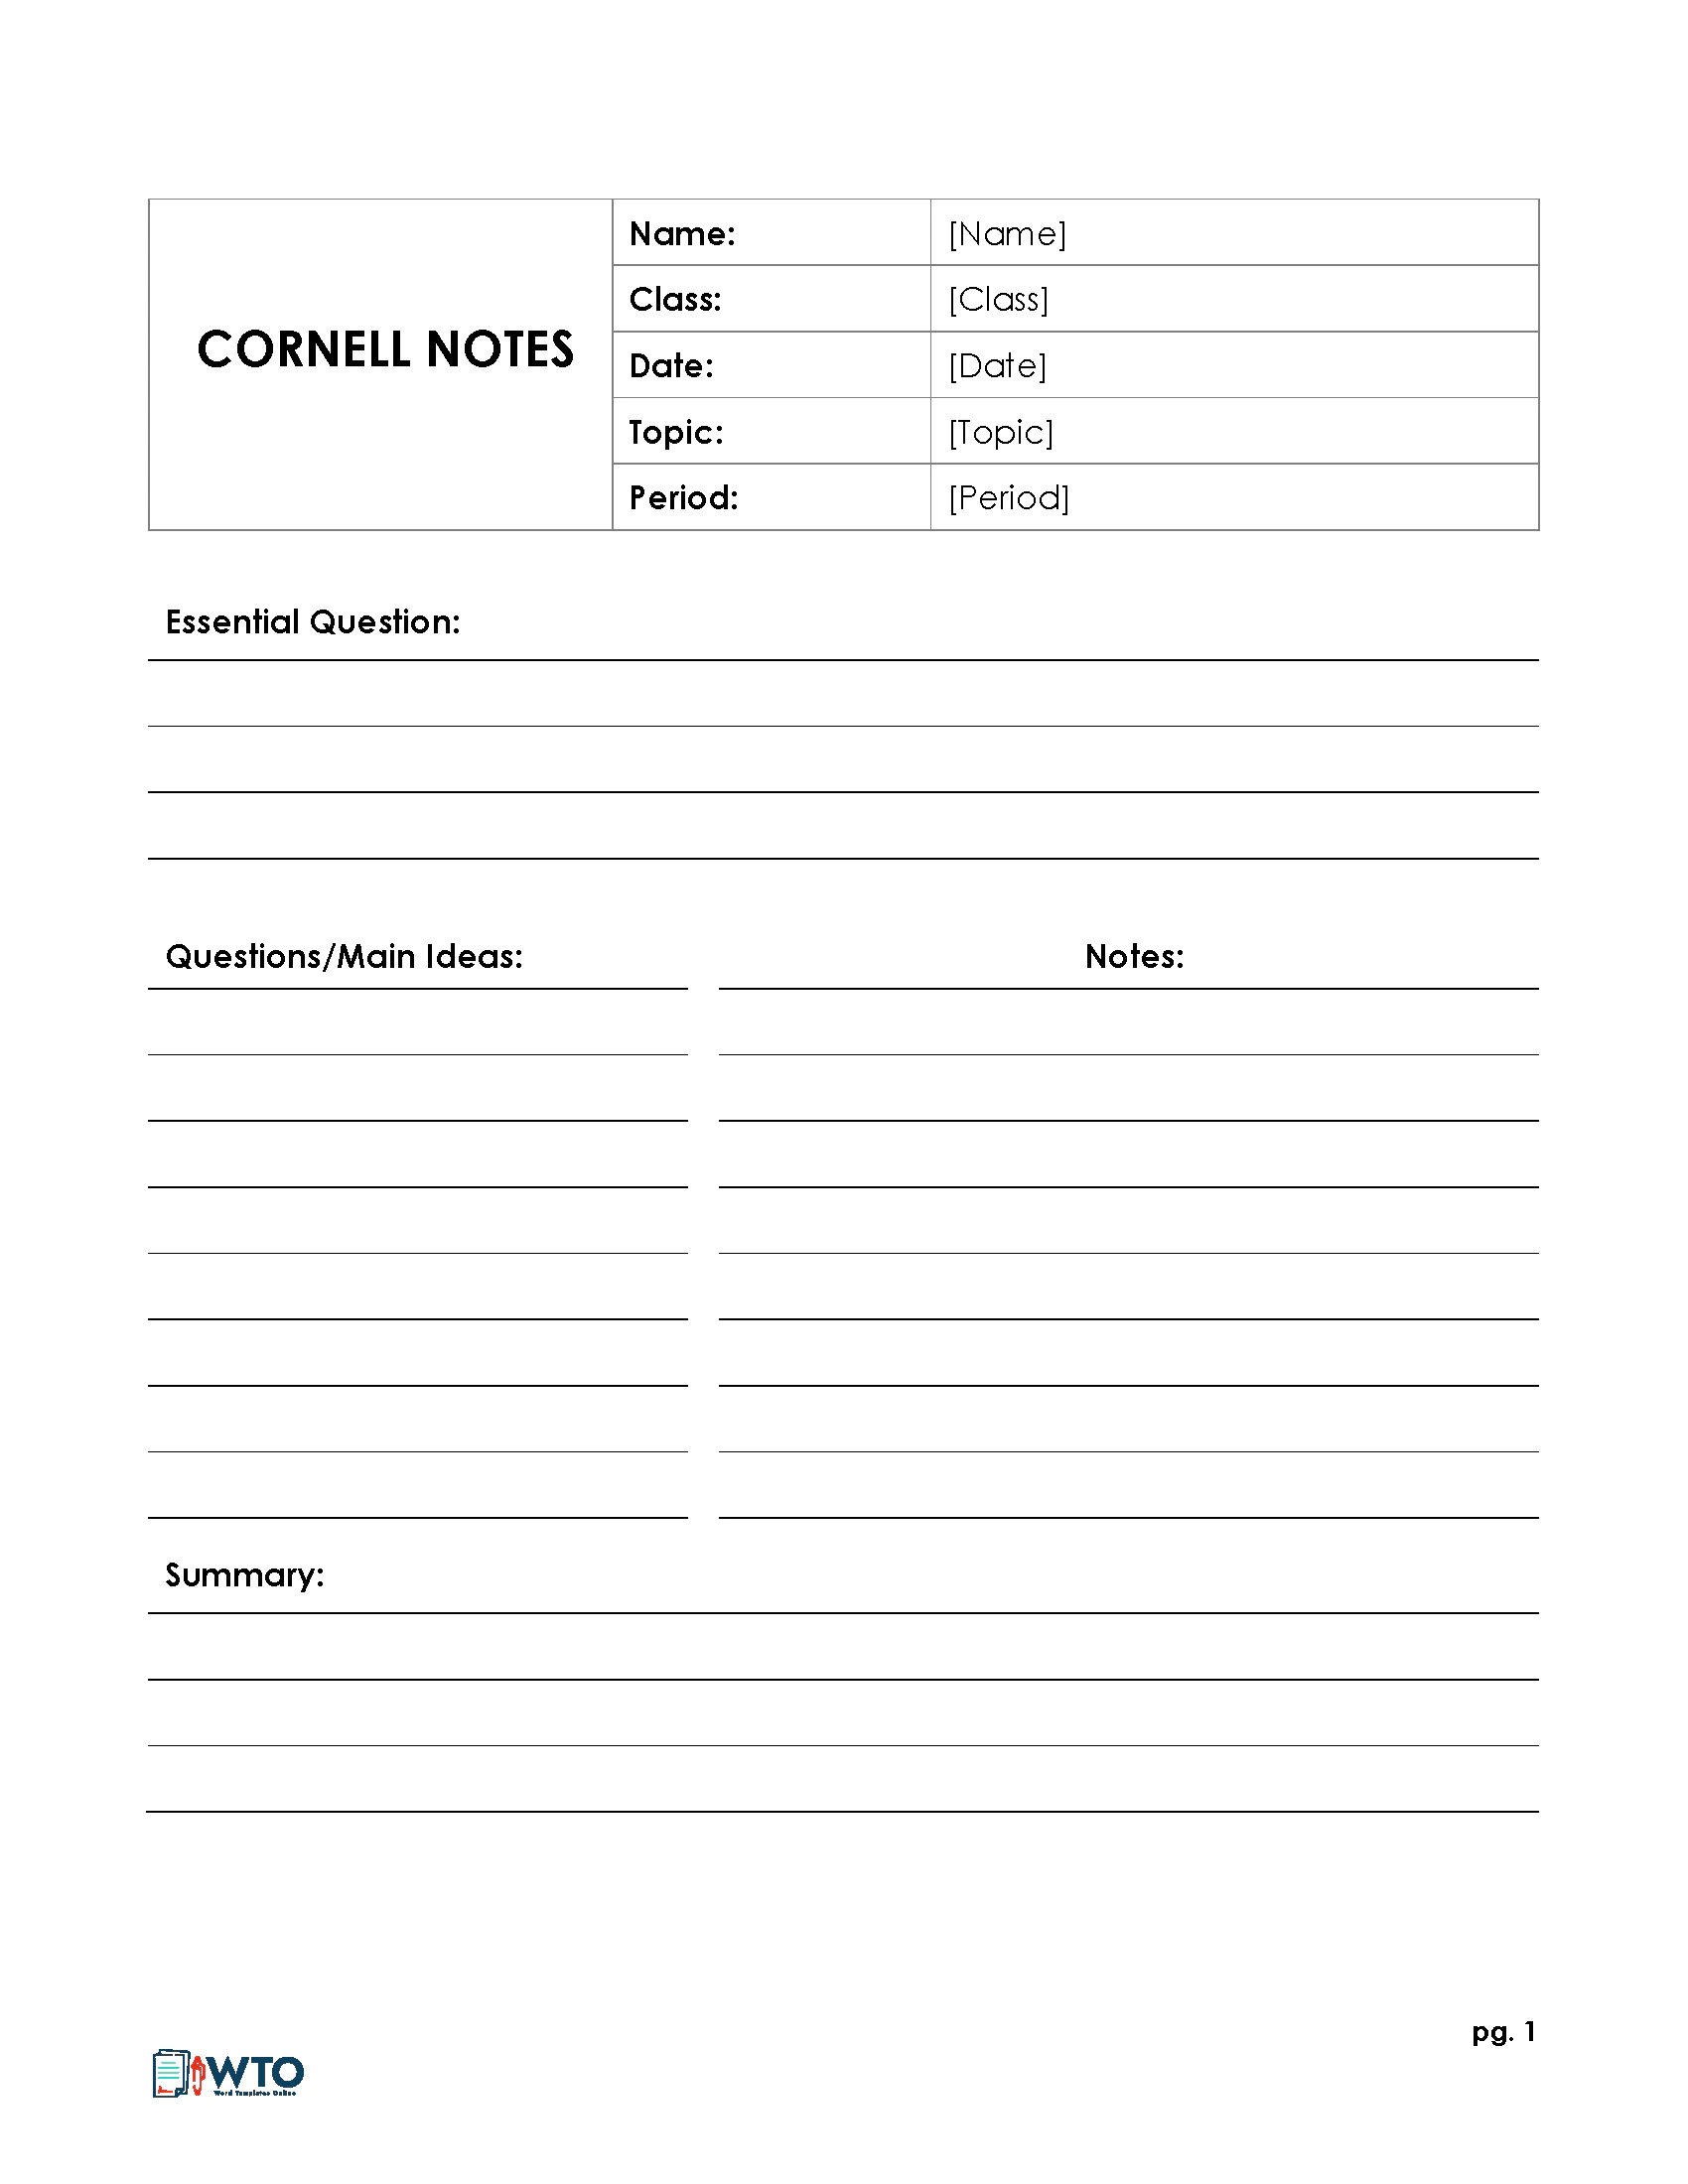 23 Free Cornell Note Templates (Cornell Note Taking Explained) In Cornell Notes Template Google Docs